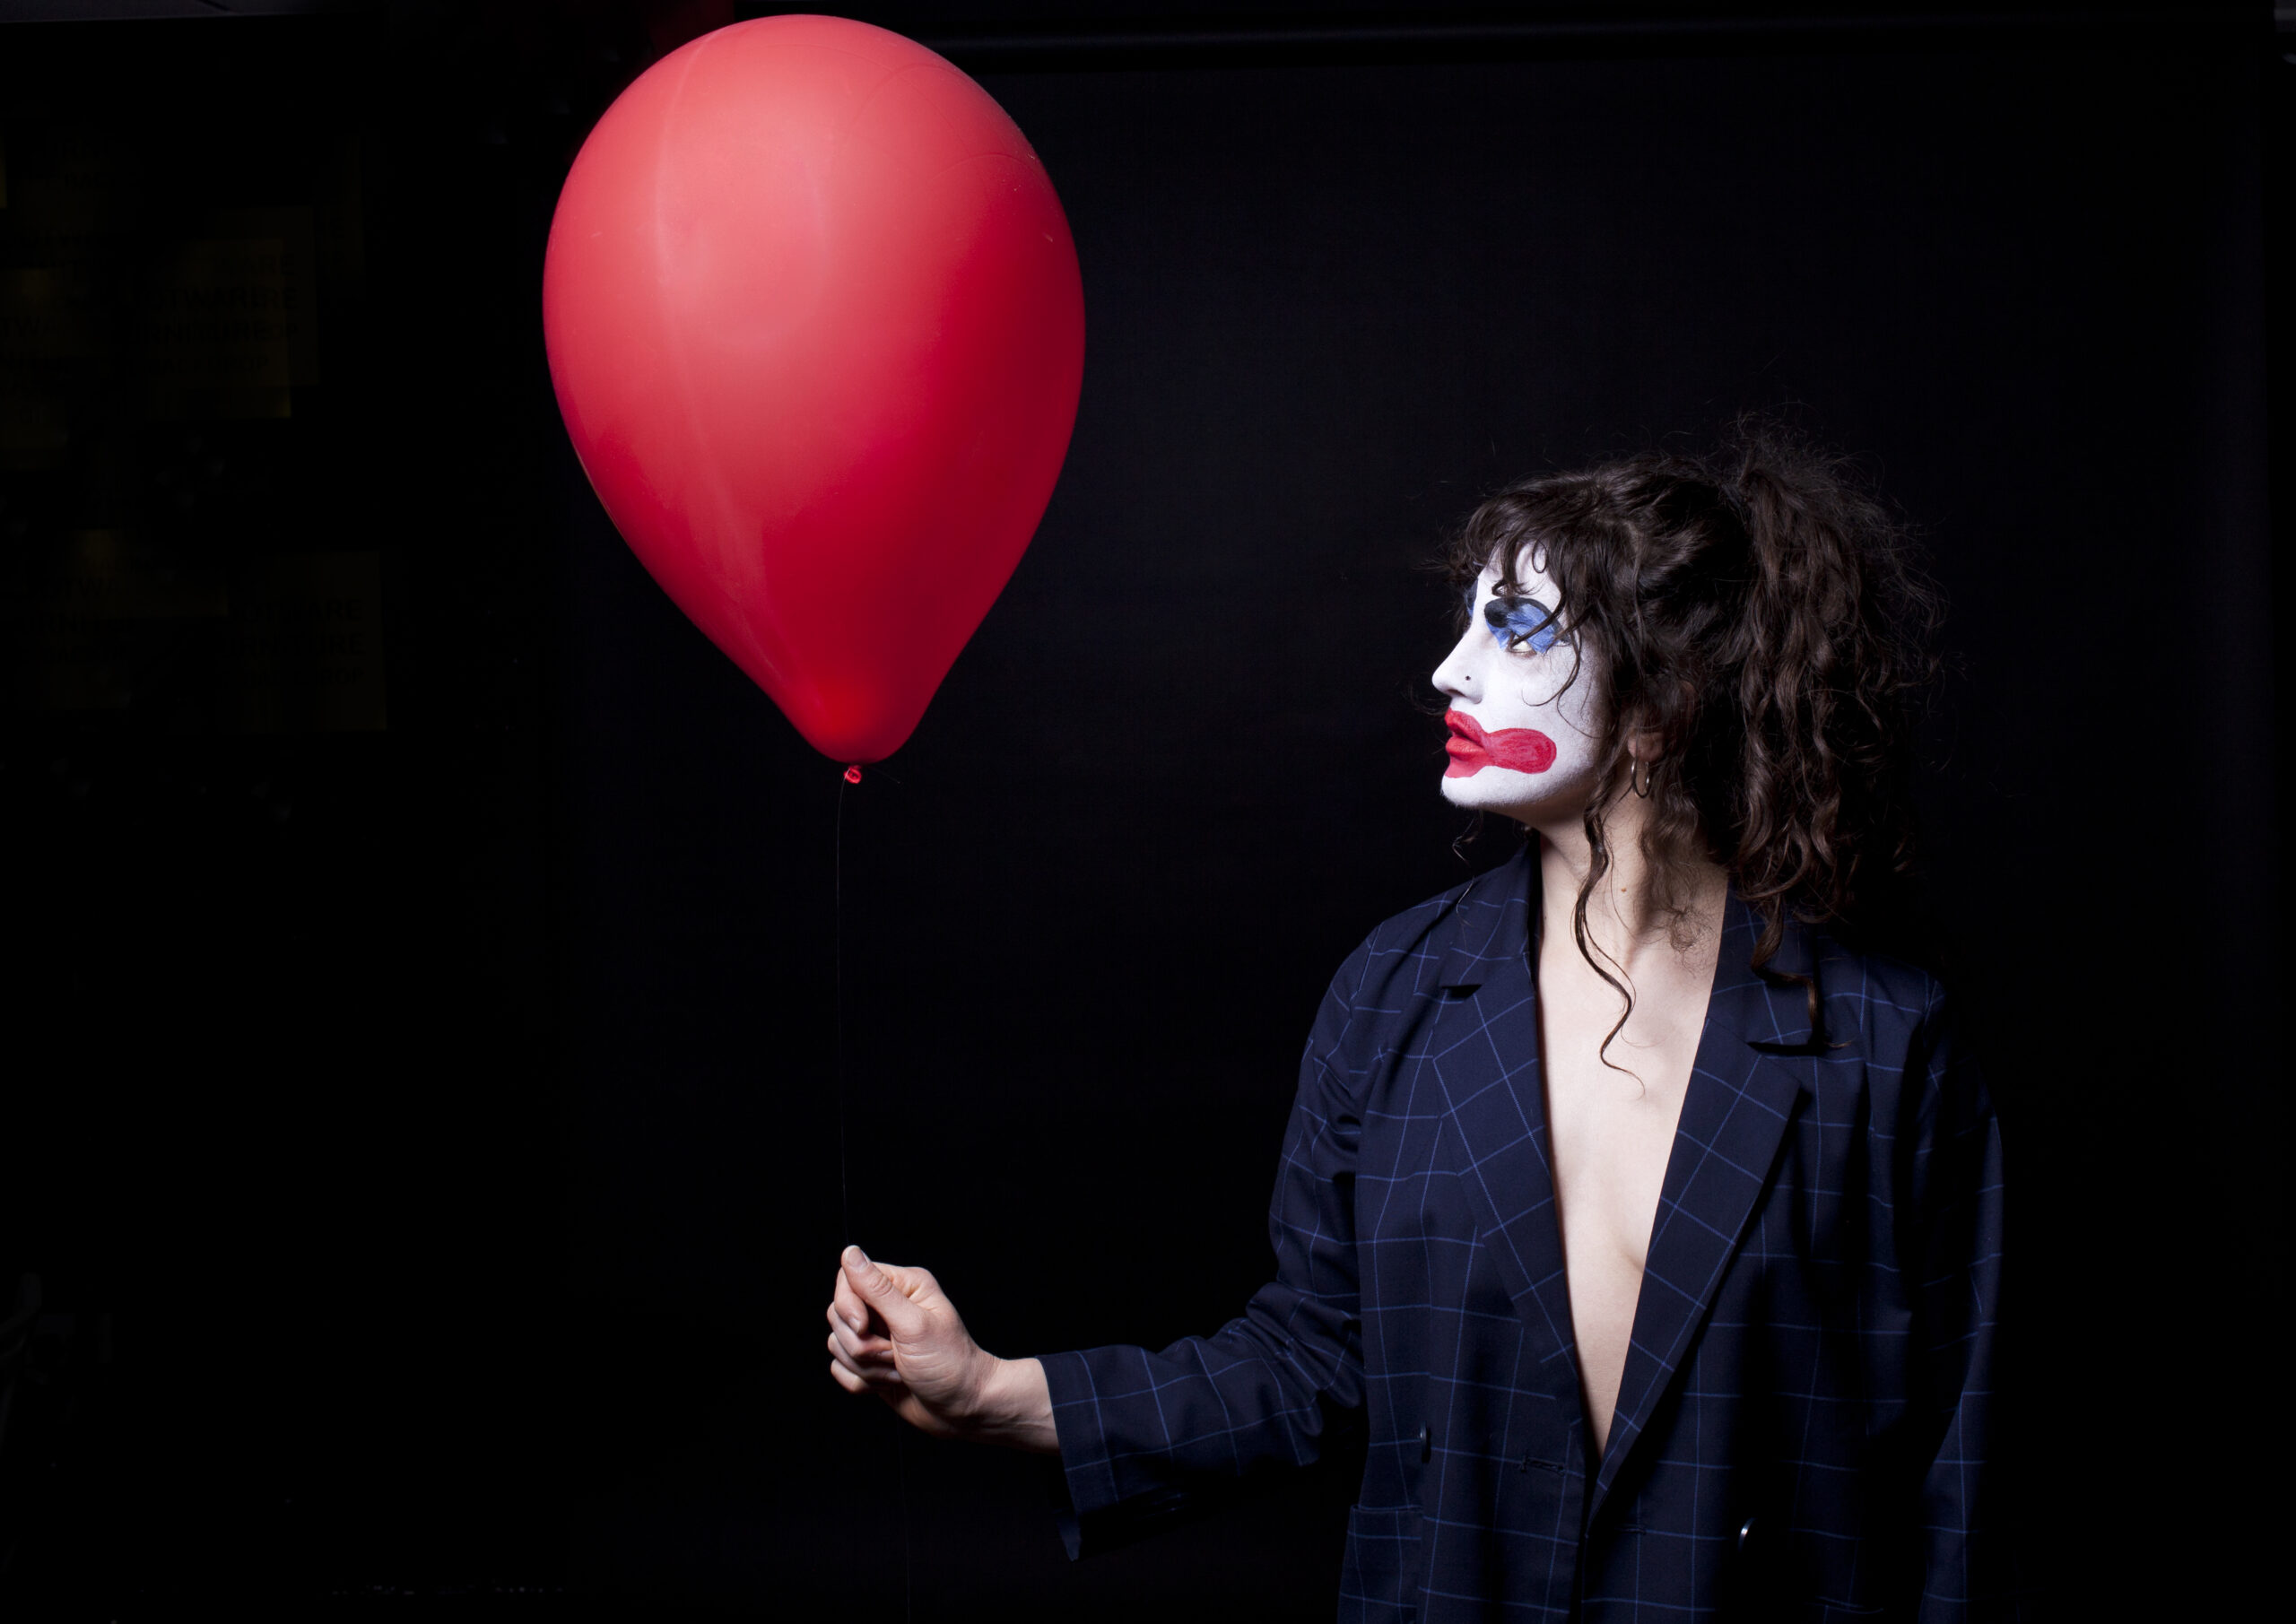 A photo of a person dressed in a suit jacket, holding a red balloon. They have traditional clown face make up on with their hair tied up. They are looking up at the balloon.